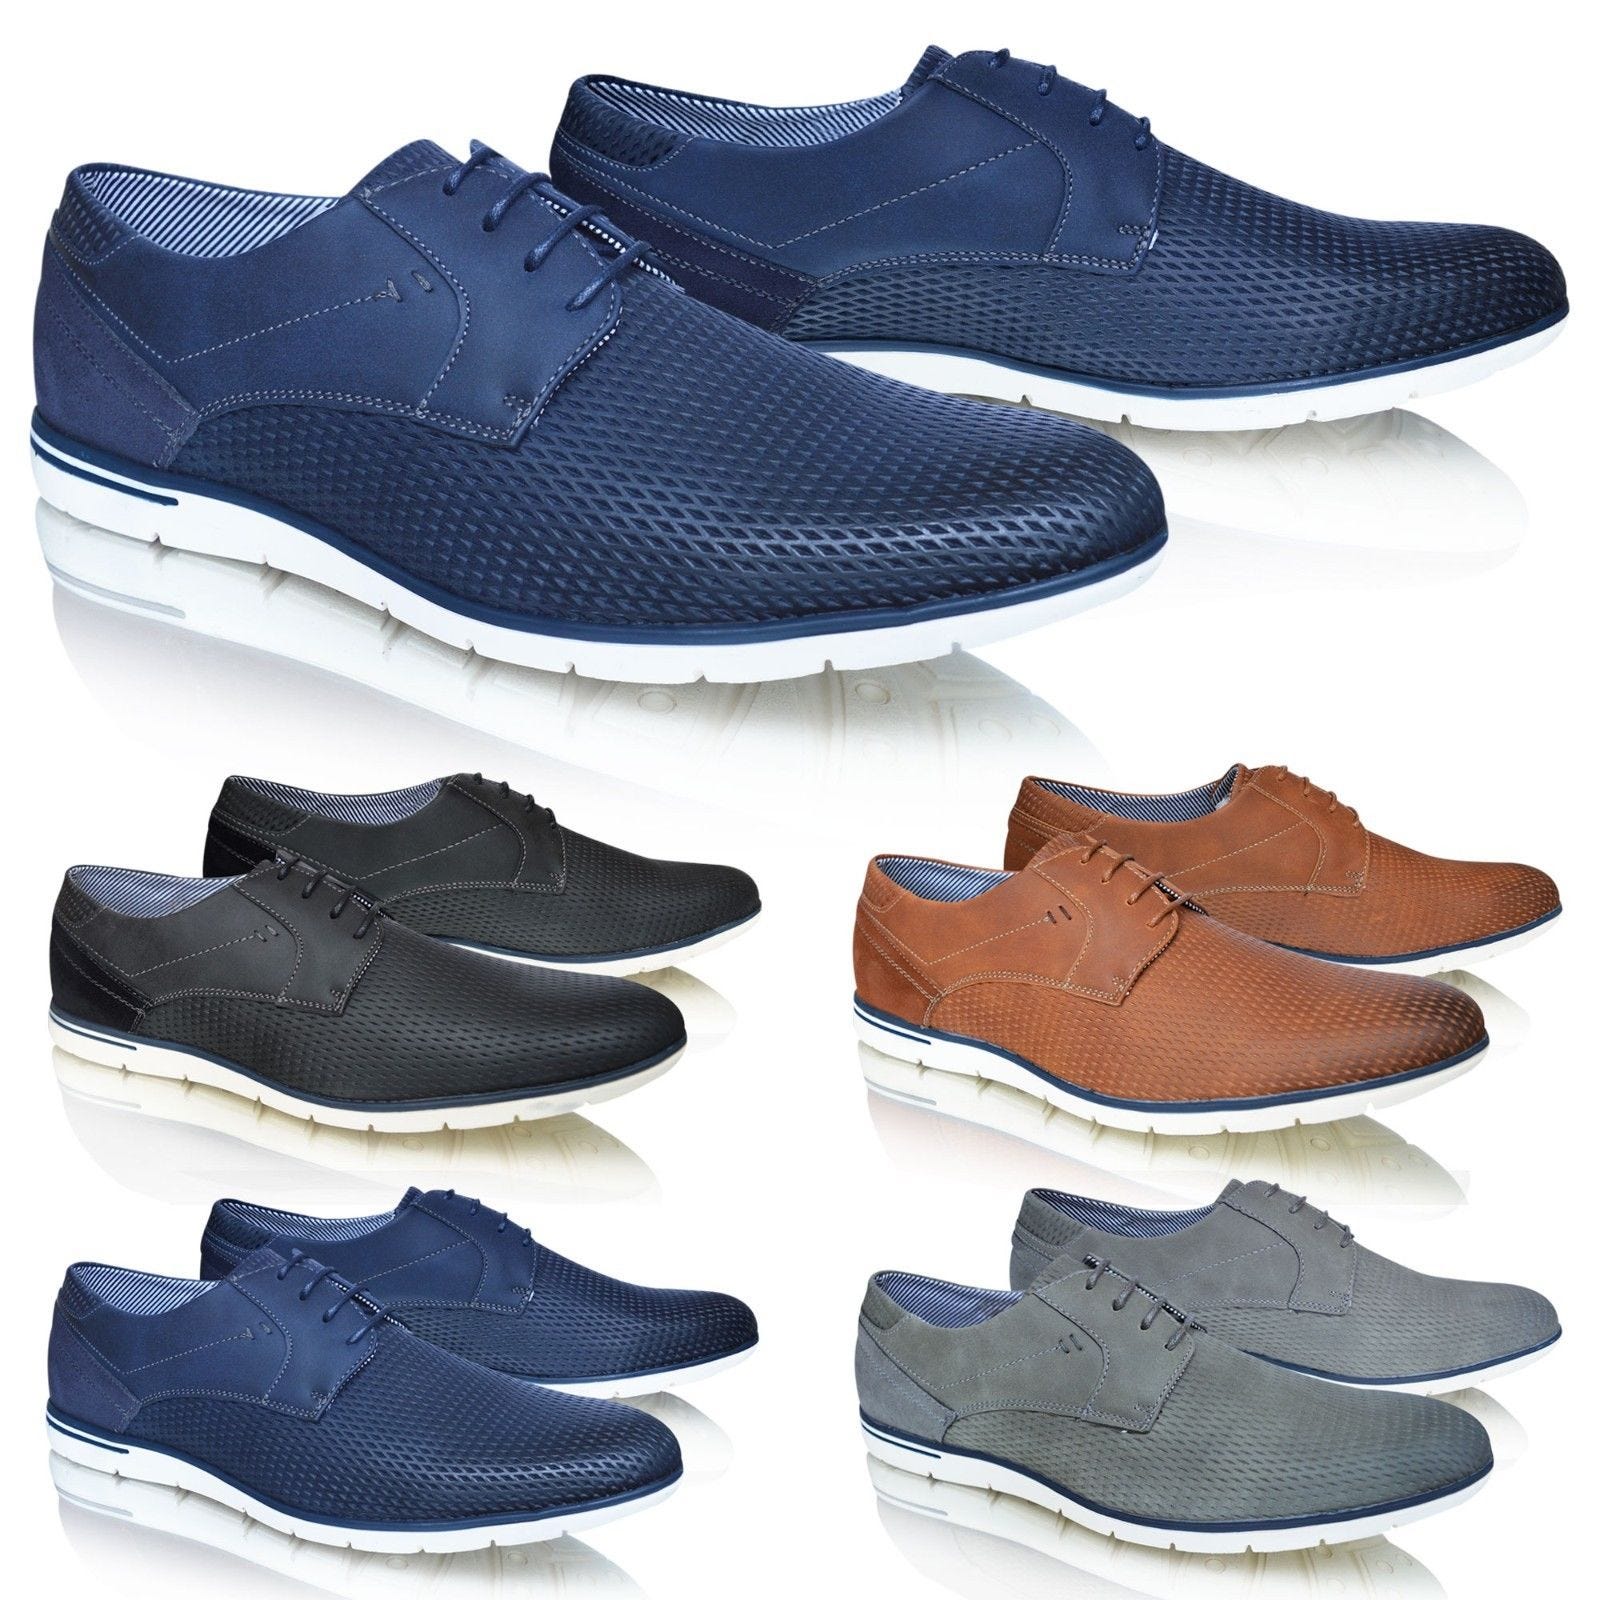 shoes for both casual and formal